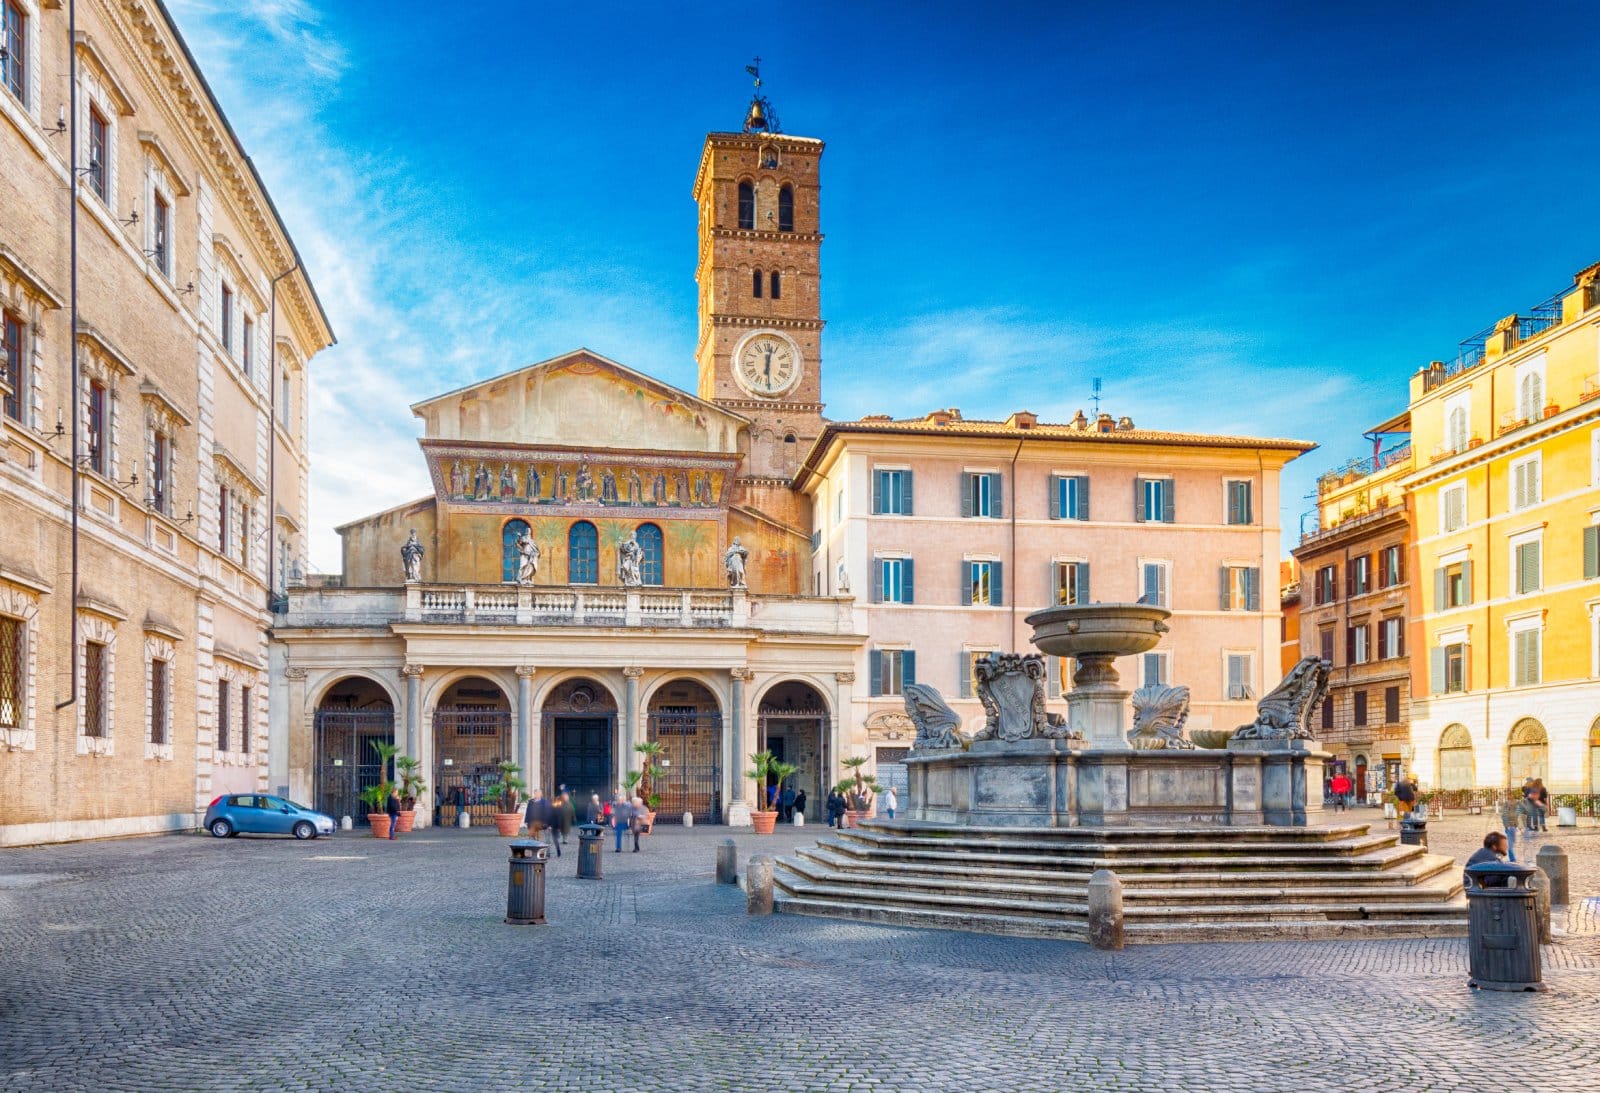 Image Credit: Shutterstock / Vivida Photo PC <p>Historic cities like Rome and Venice see their cultural sites overrun with tourists, many of whom are loud and disrespectful. Italians are particularly annoyed by Brits who ignore dress codes and local customs.</p>